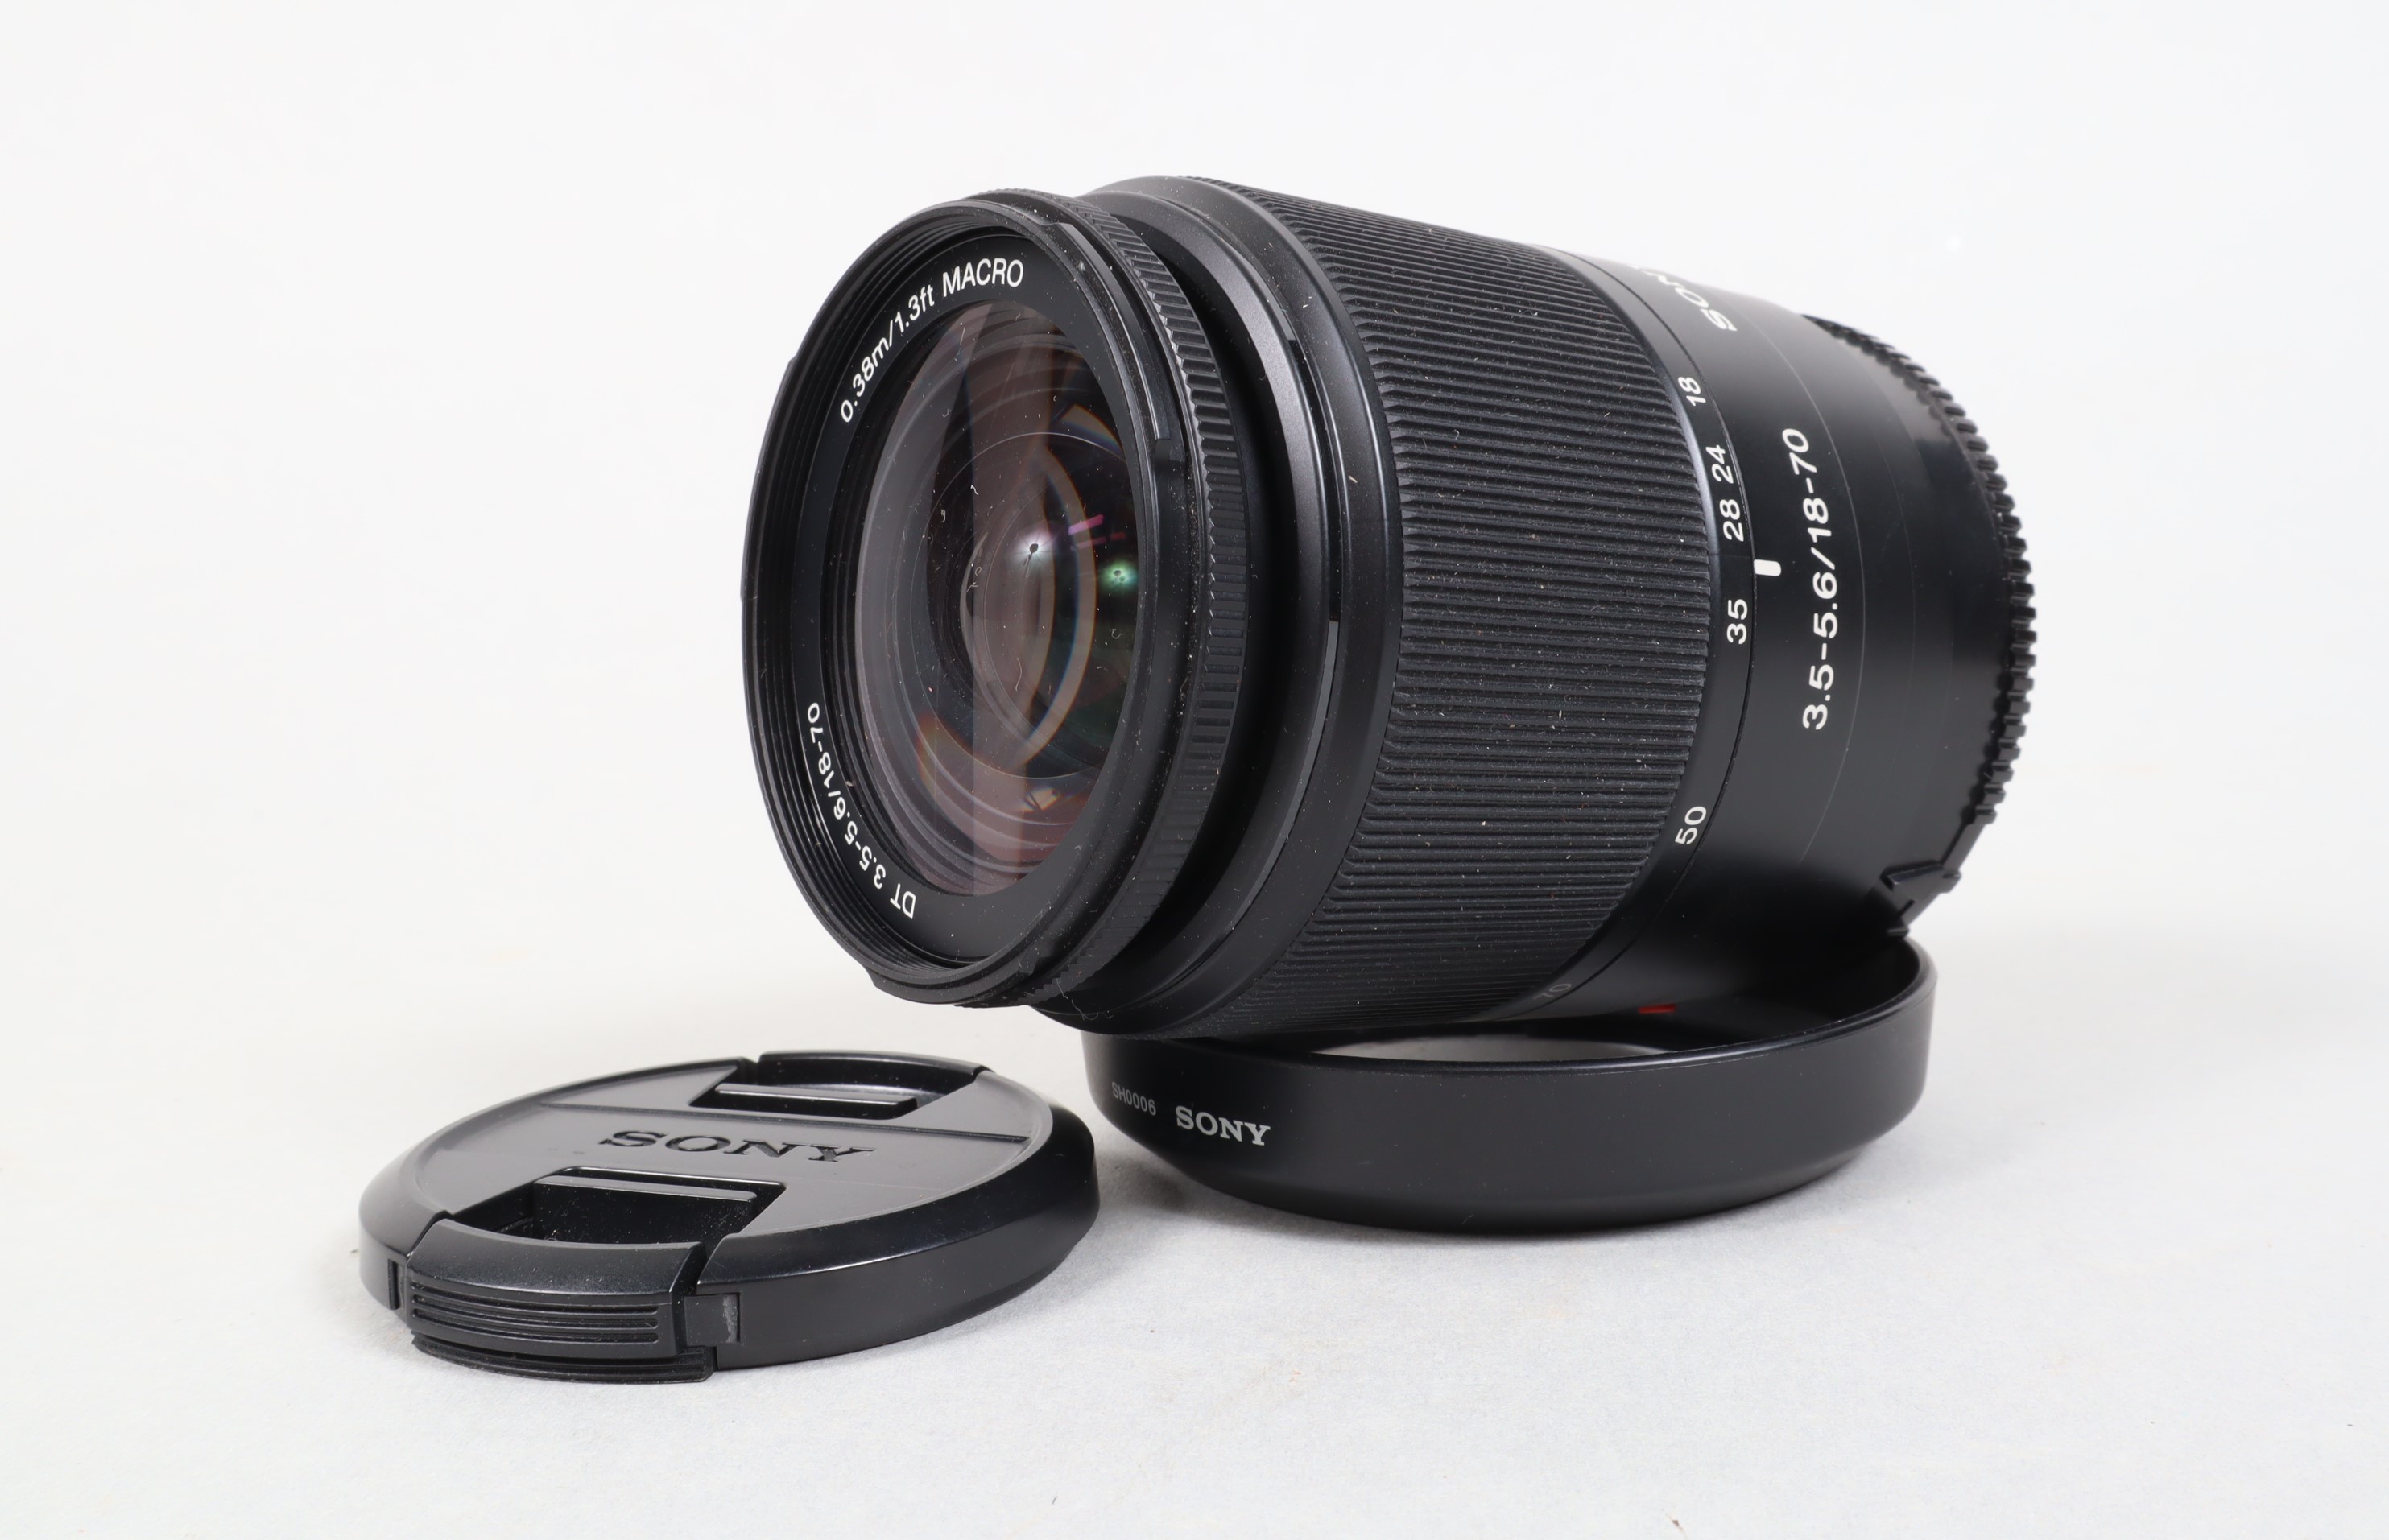 A Sony DT 18-70mm f/3.5-5.6 Lens, 0.38m/1.3ft Macro, auto focus functions, barrel G-VG, elements G-